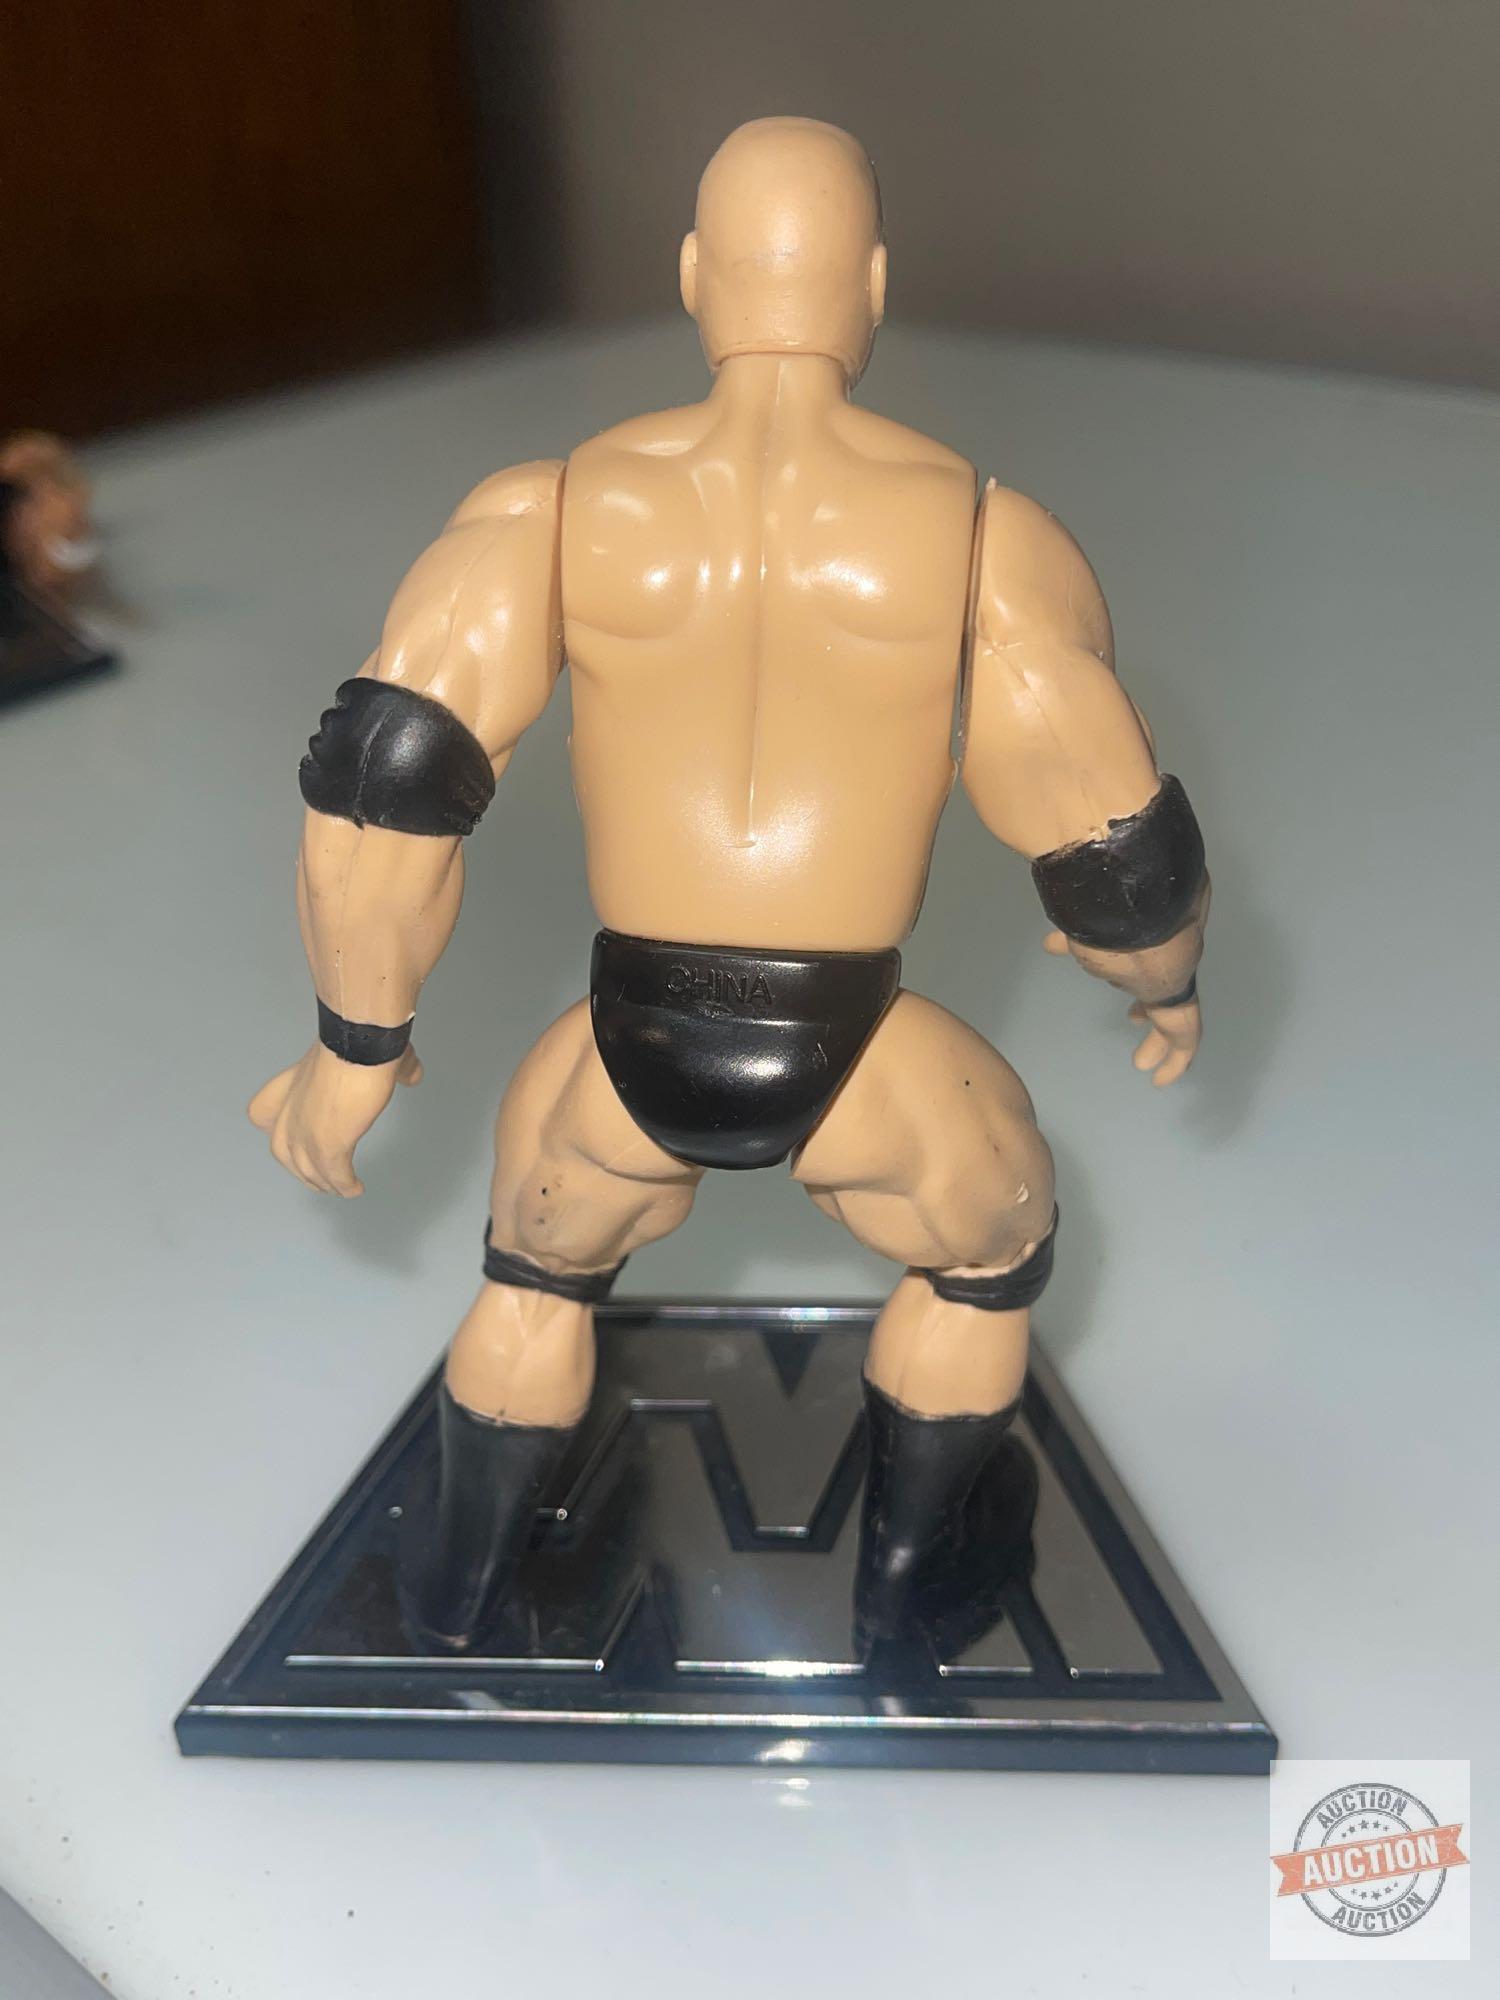 Toys - WWF Wrestling auction figures, 1996, 6" with stands, 4x's the money